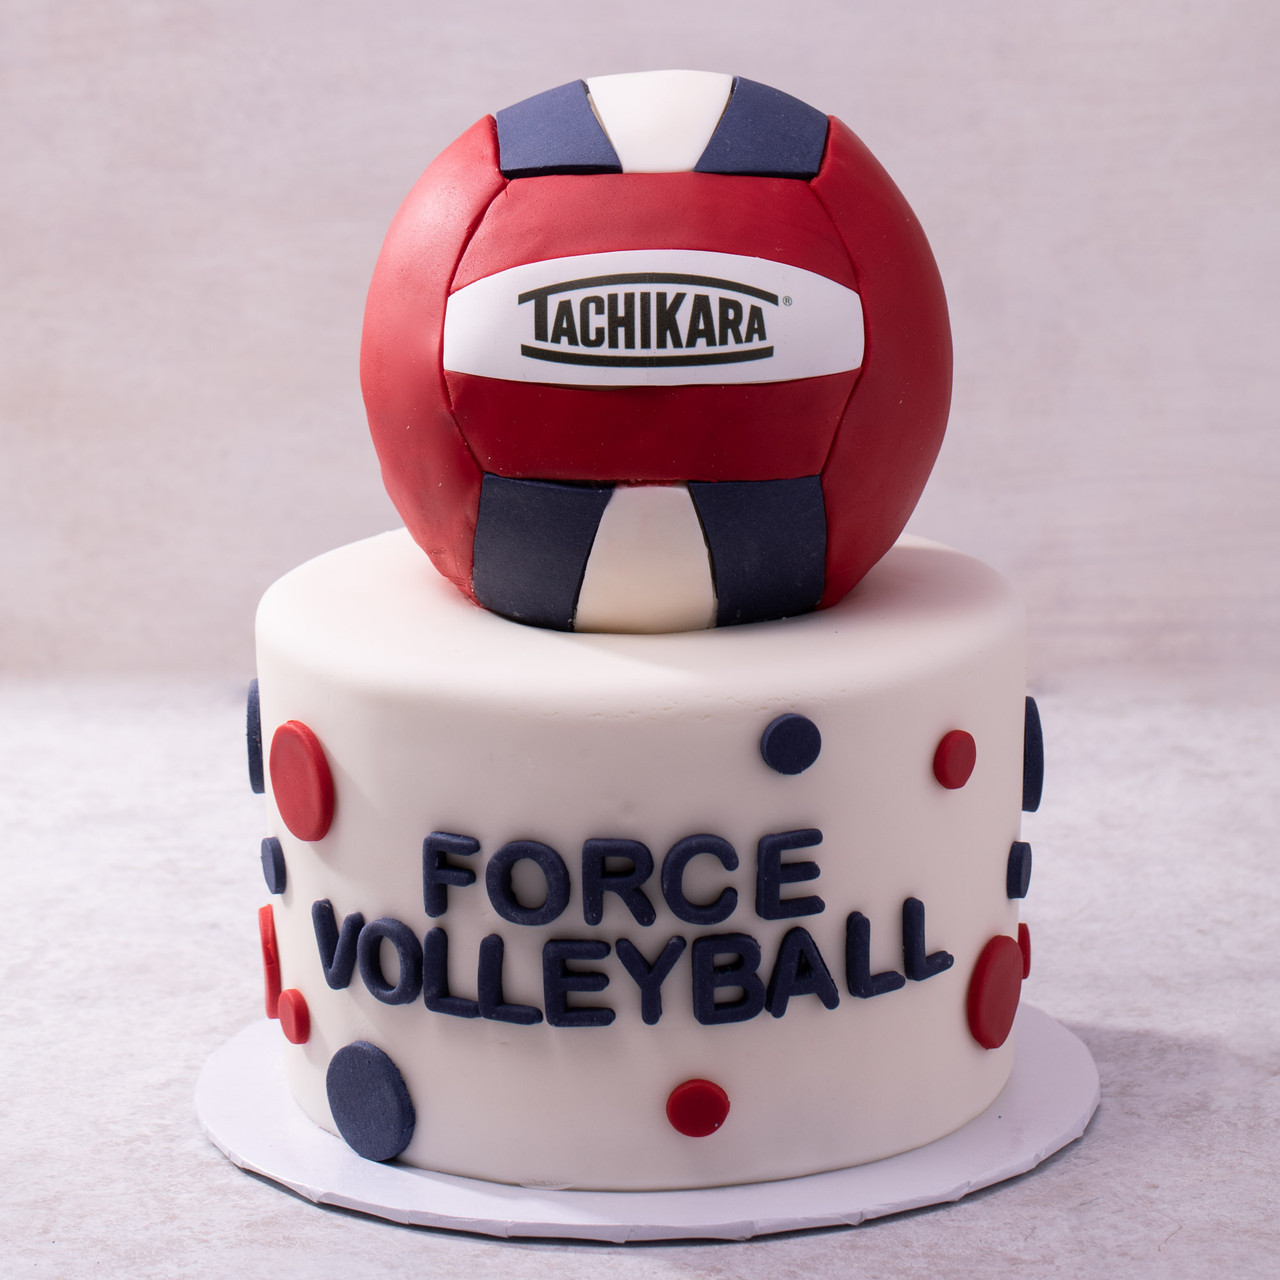 The Bake More: Volleyball Court Cake